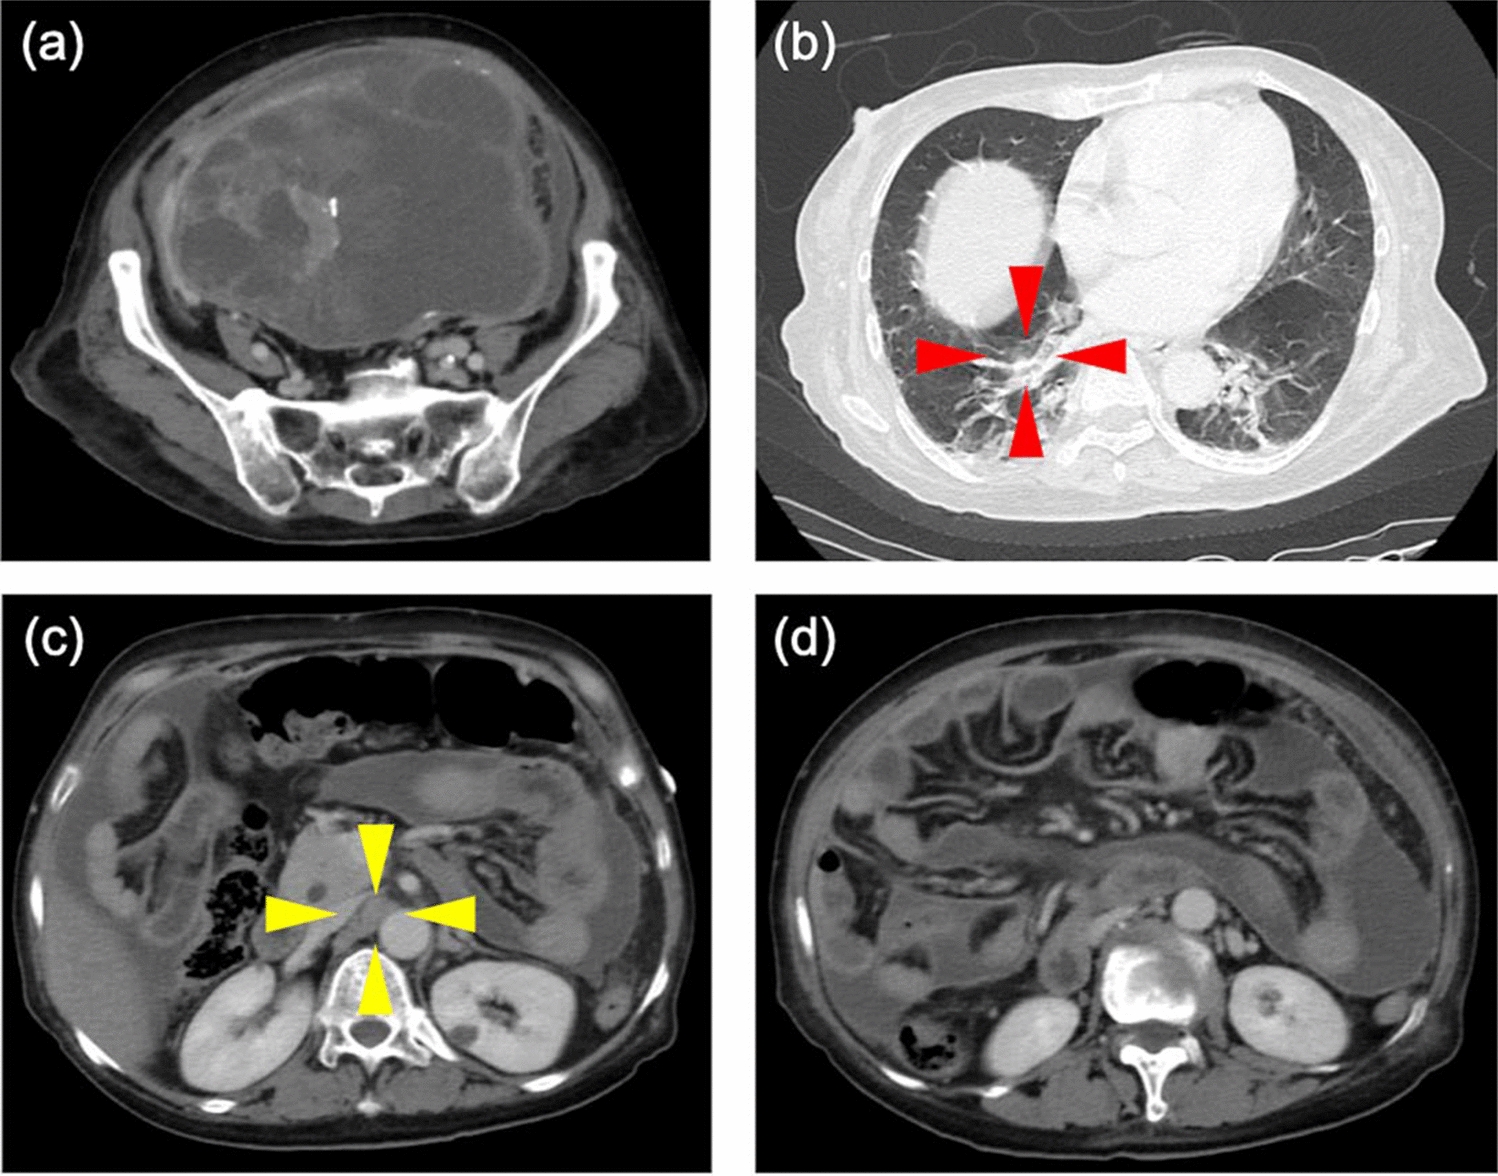 Coexistence of ovarian cancer and peritoneal tuberculosis: a case report